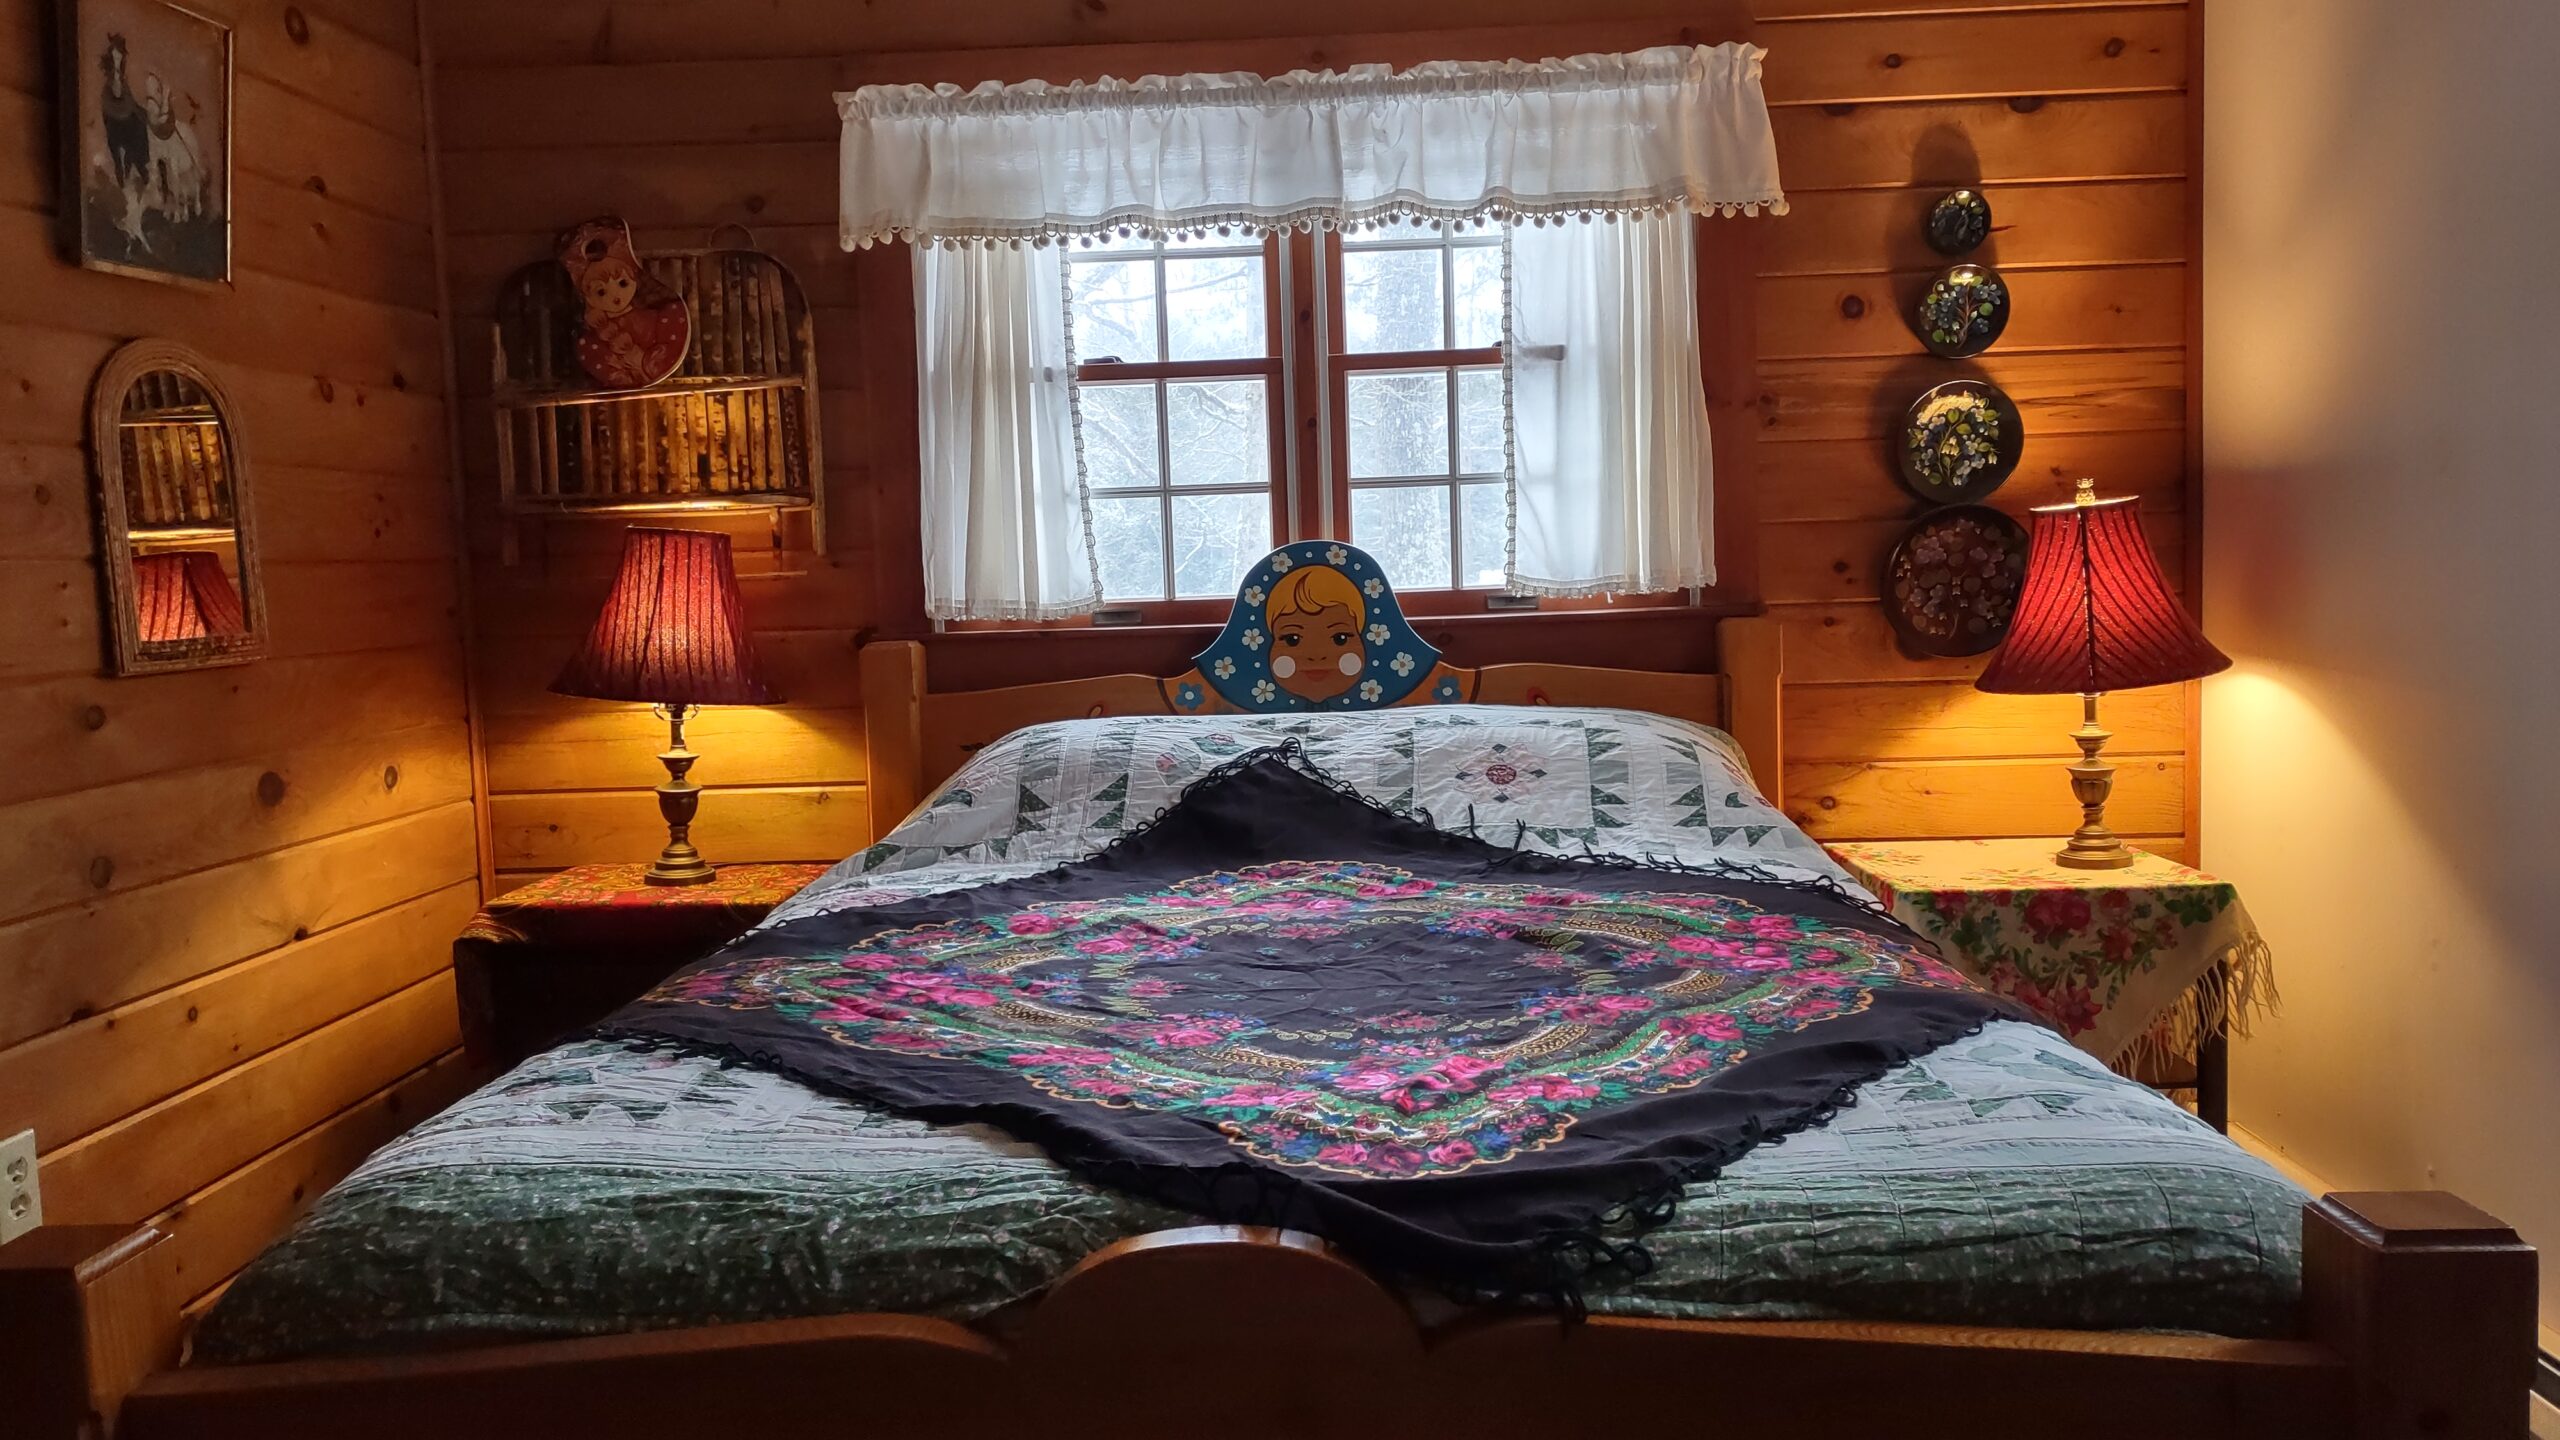 Full size bed with hand made russian doll frame